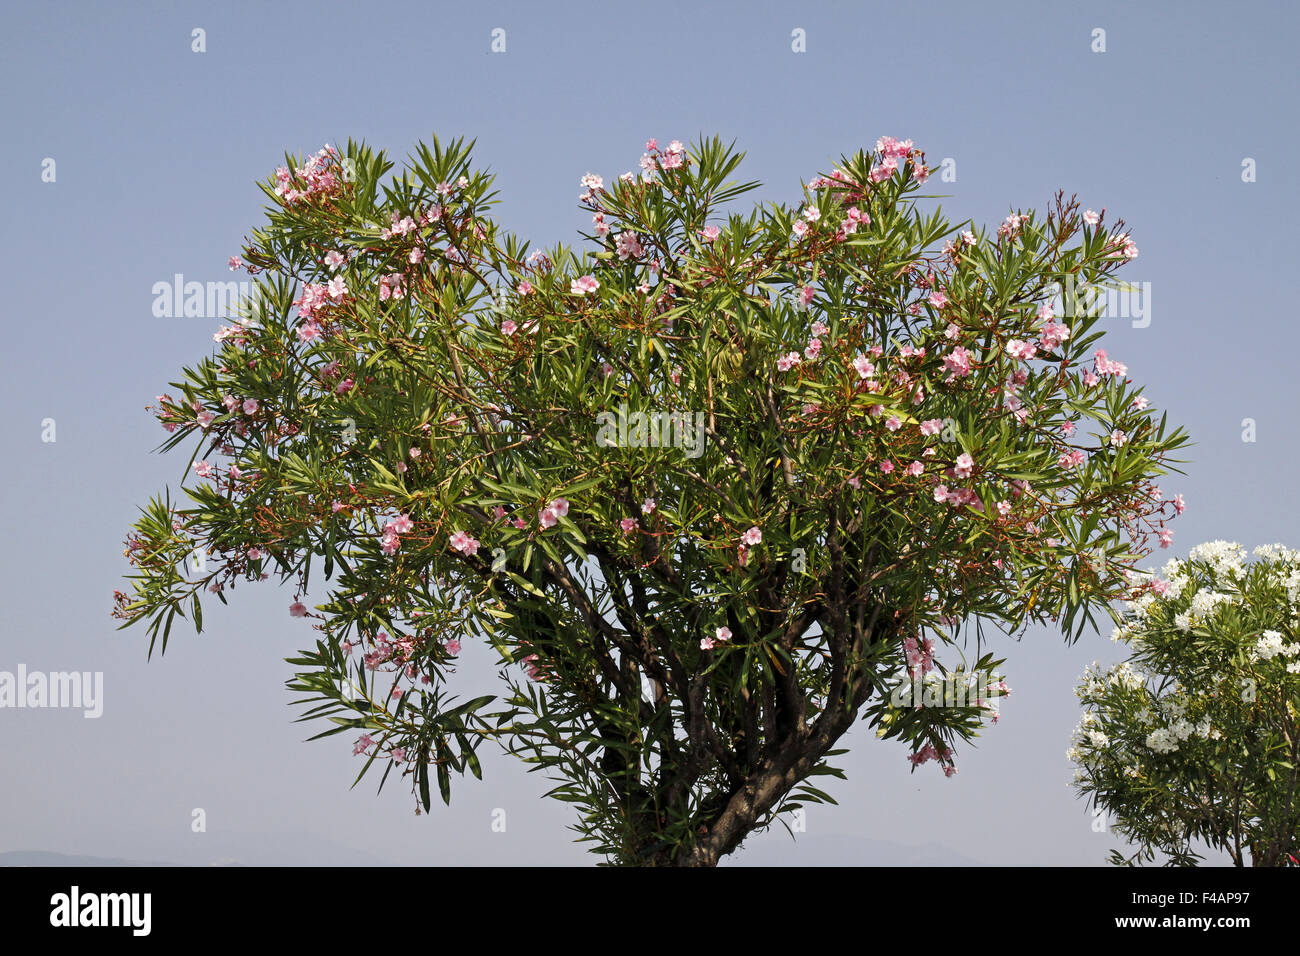 Oleander tree with blossoms Stock Photo